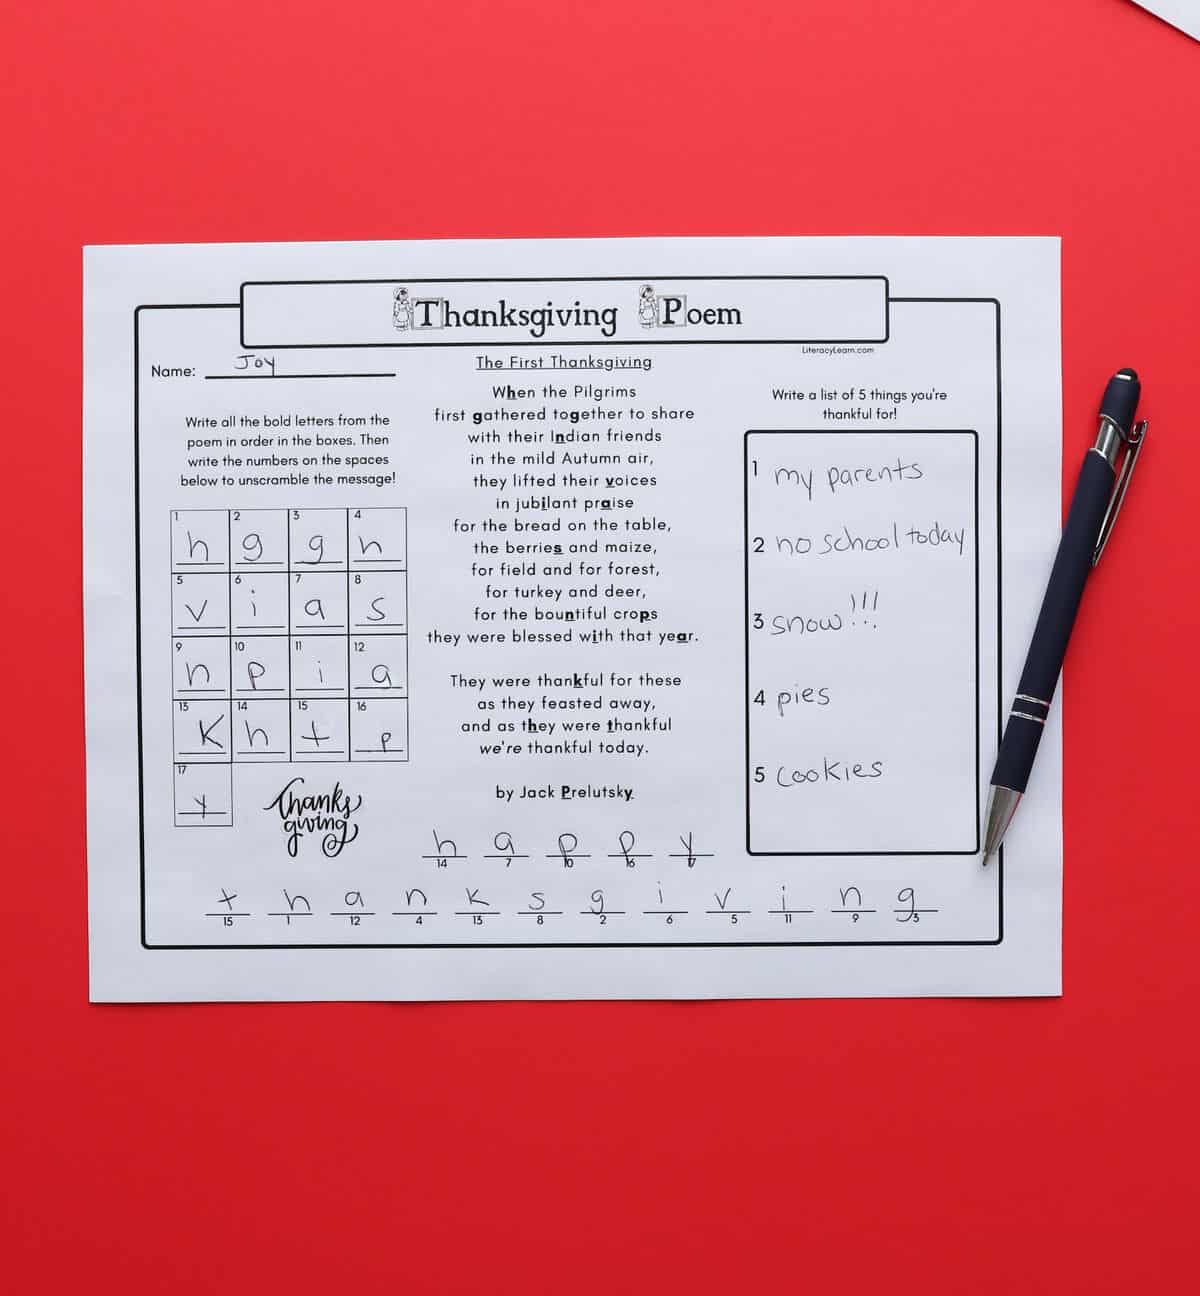 A printed and completed Thanksgiving Poem activity worksheet on a red background.